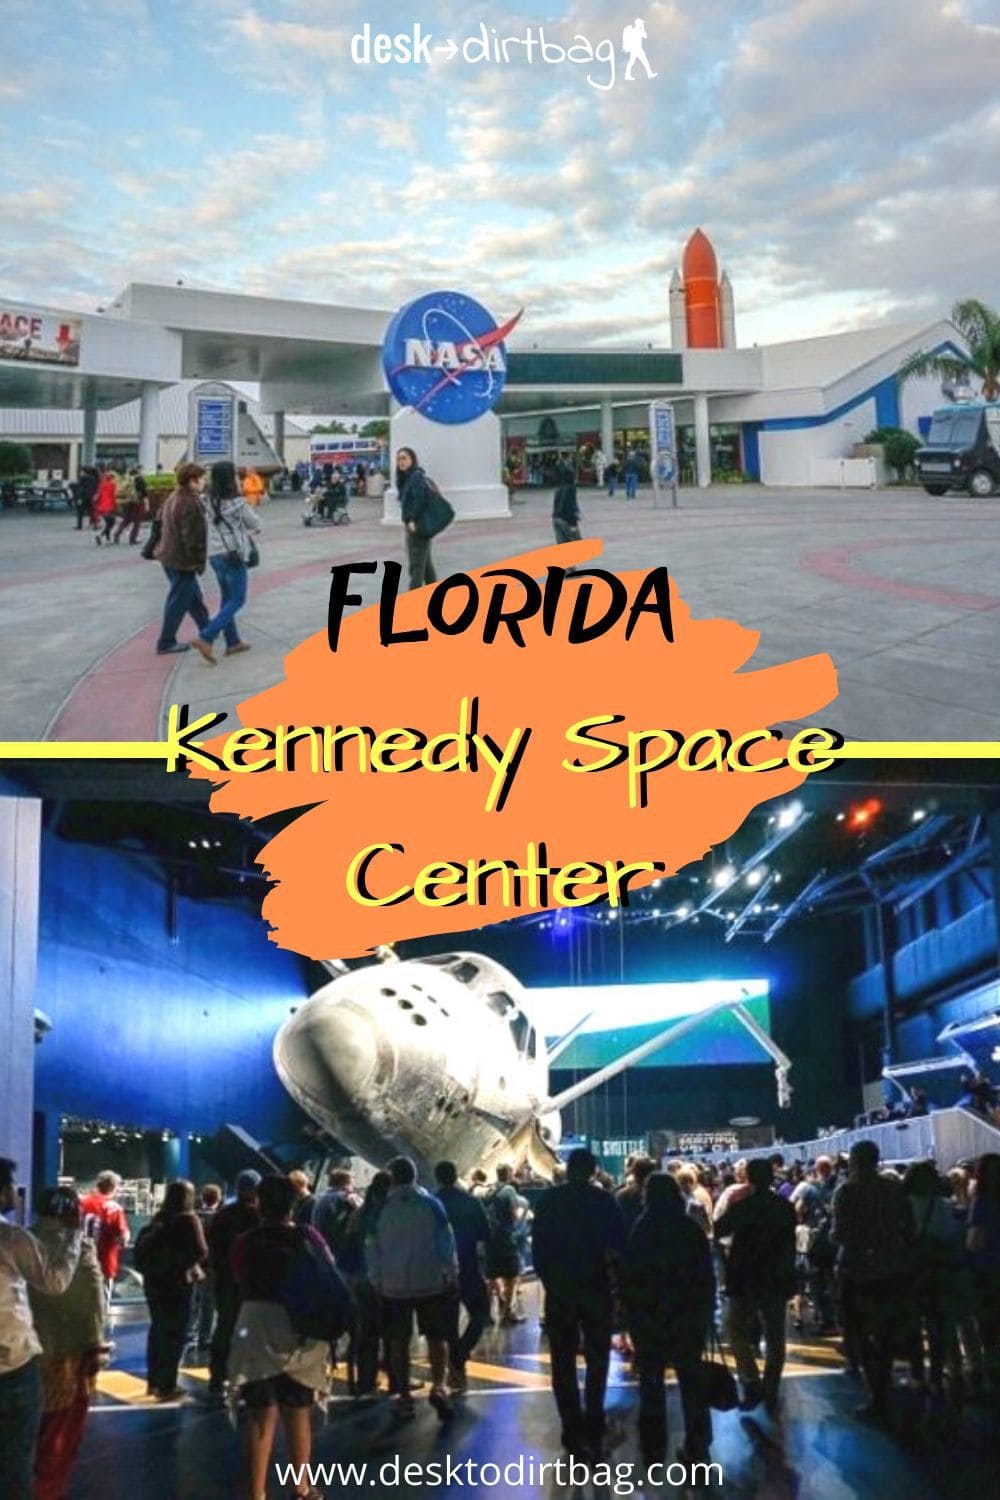 Visit the Kennedy Space Center and See a Rocket Launch Desk to Dirtbag